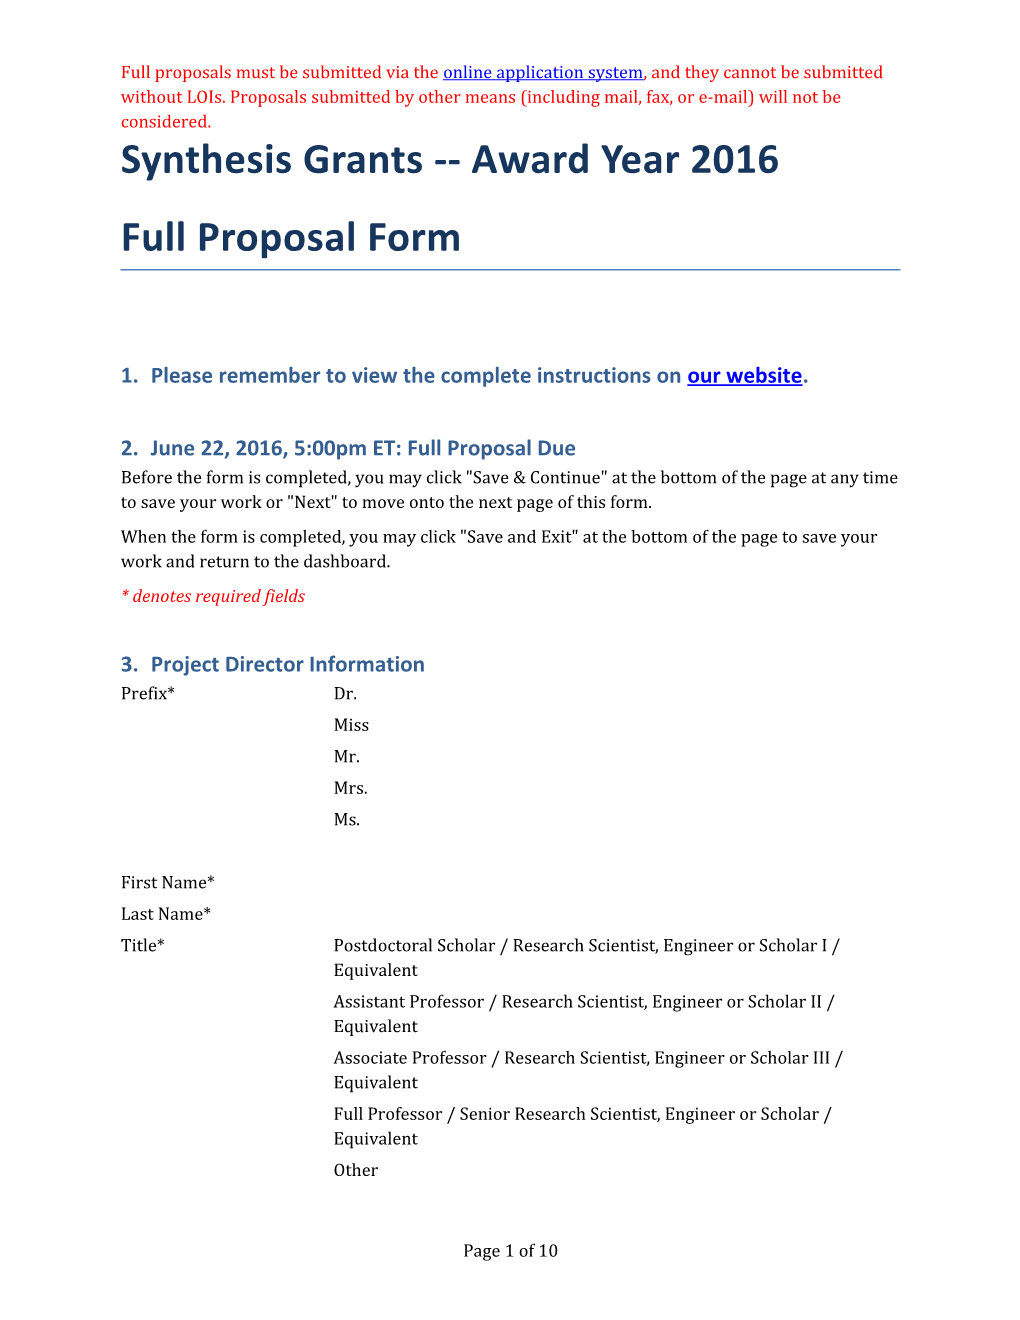 Synthesis Grants Award Year 2016 Full Proposal Form